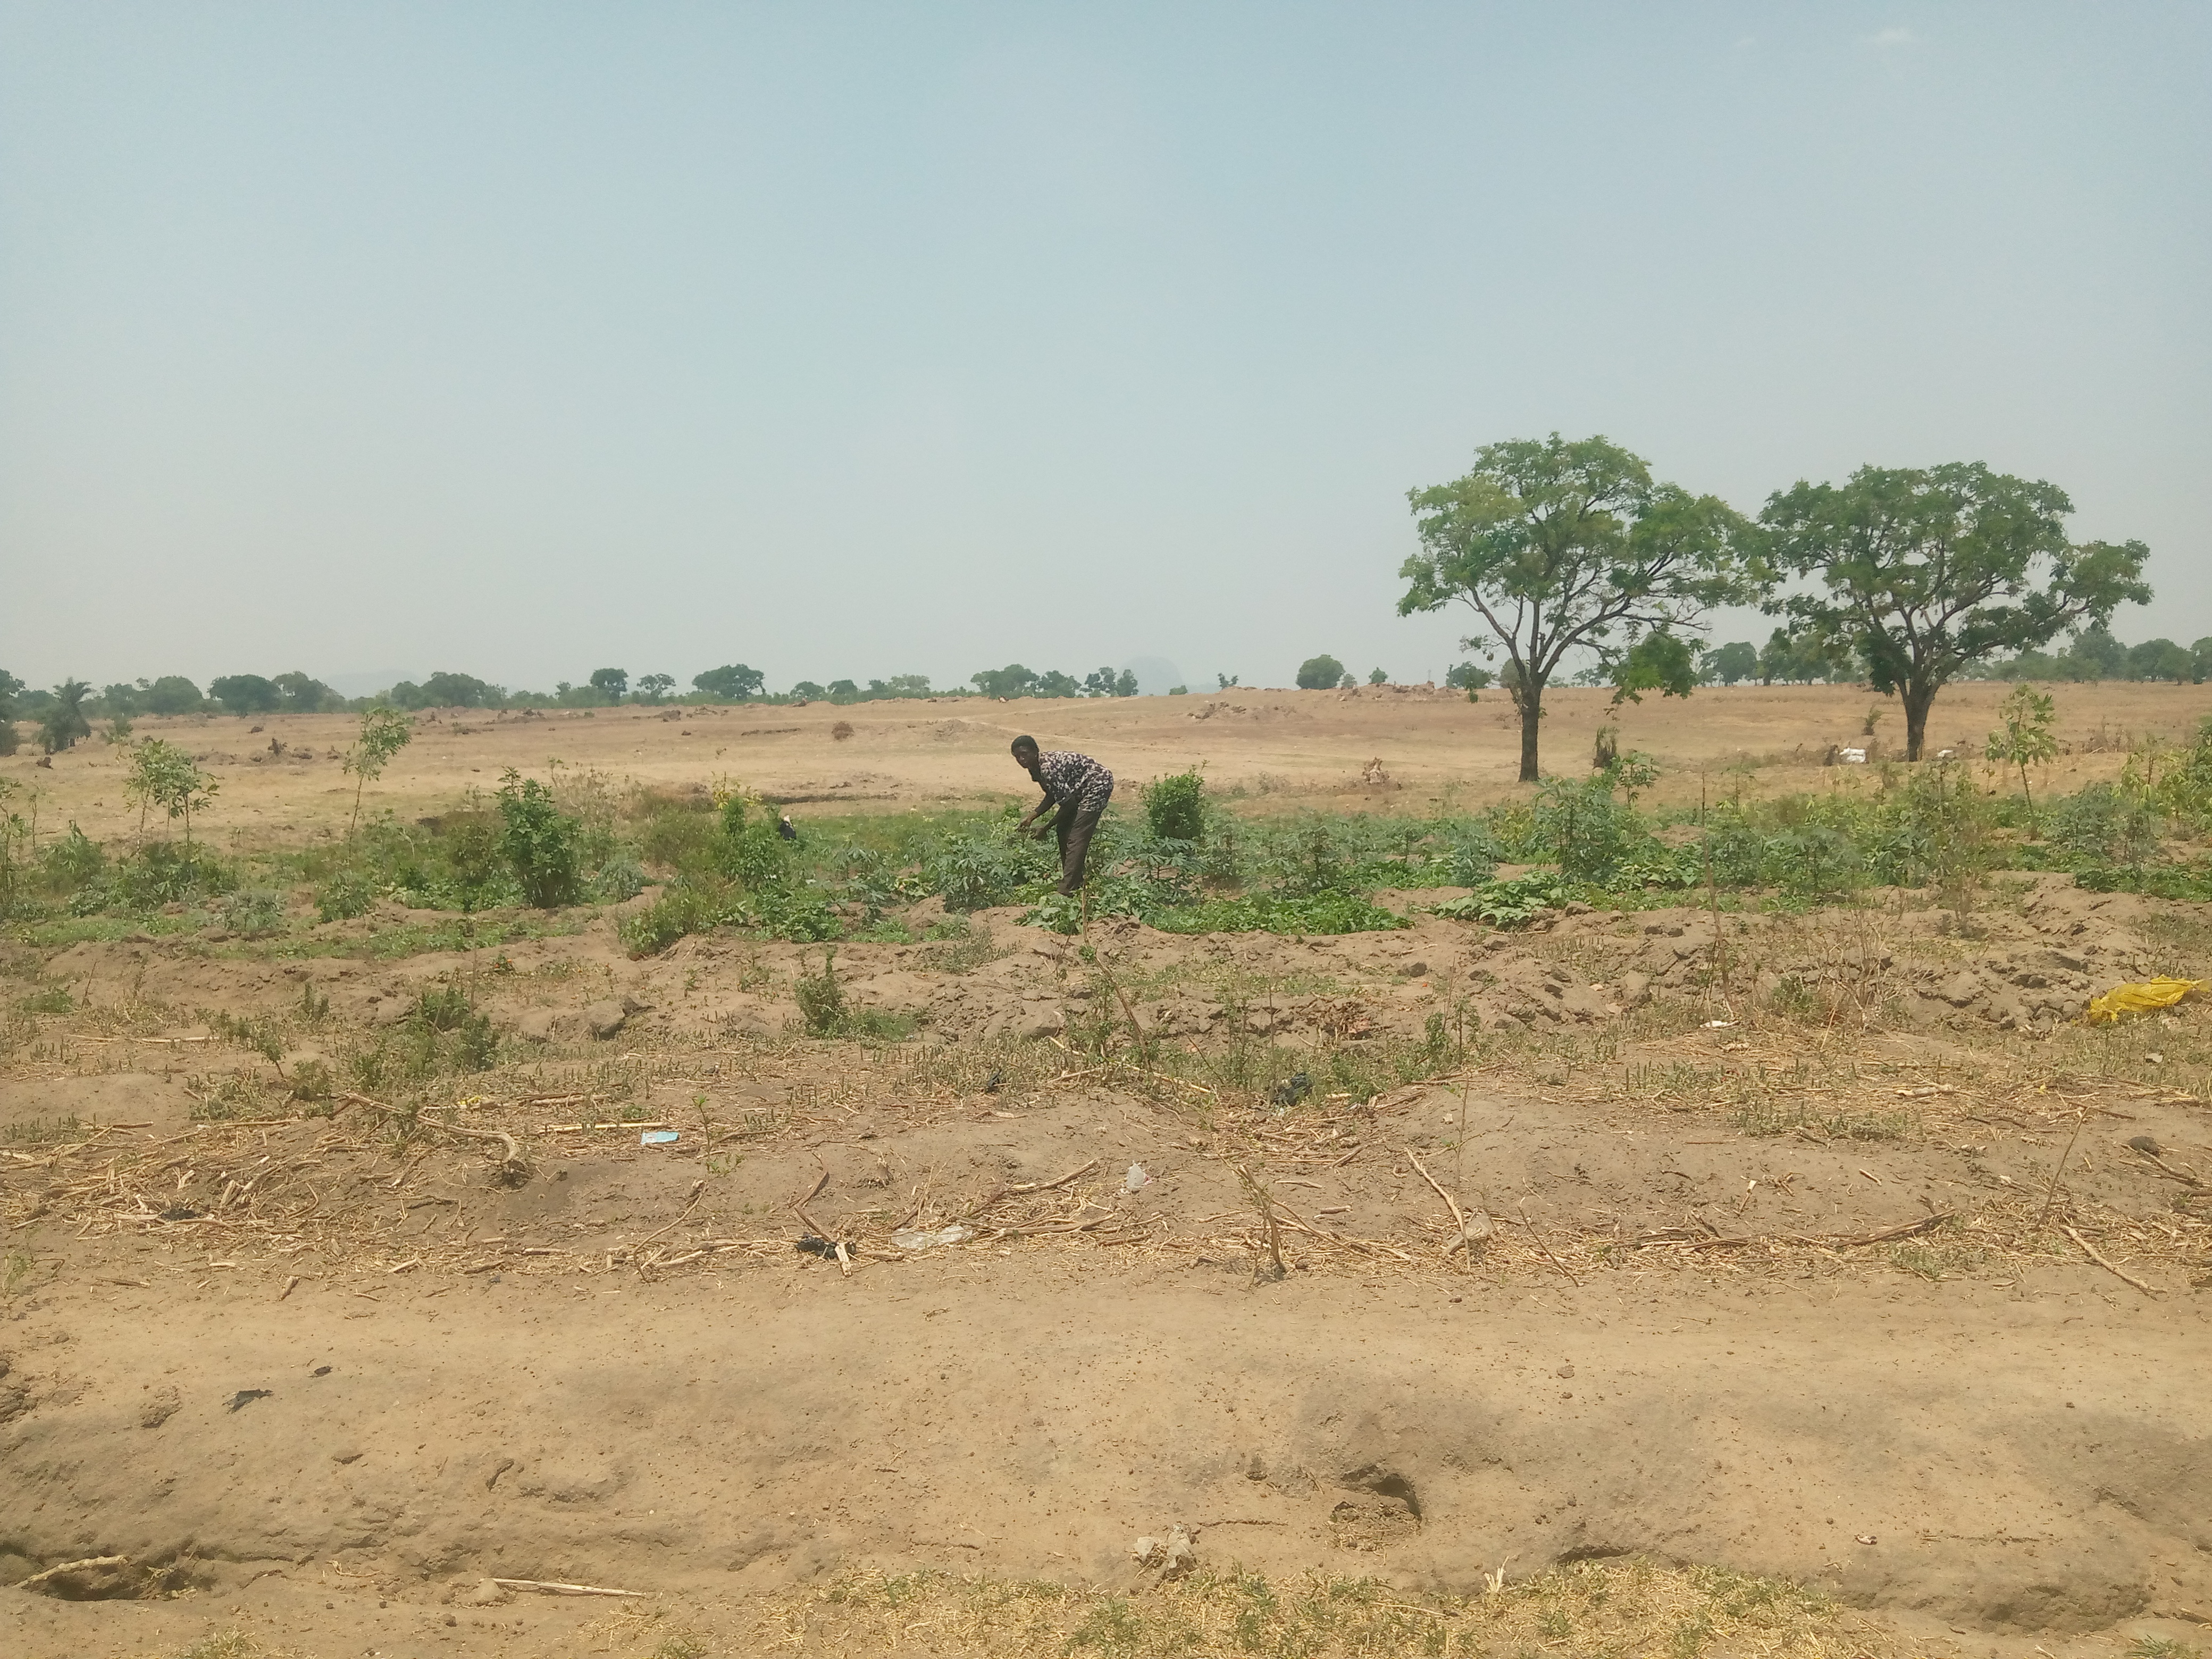 Climate Change Impacts FCT women farmers, widens inequality